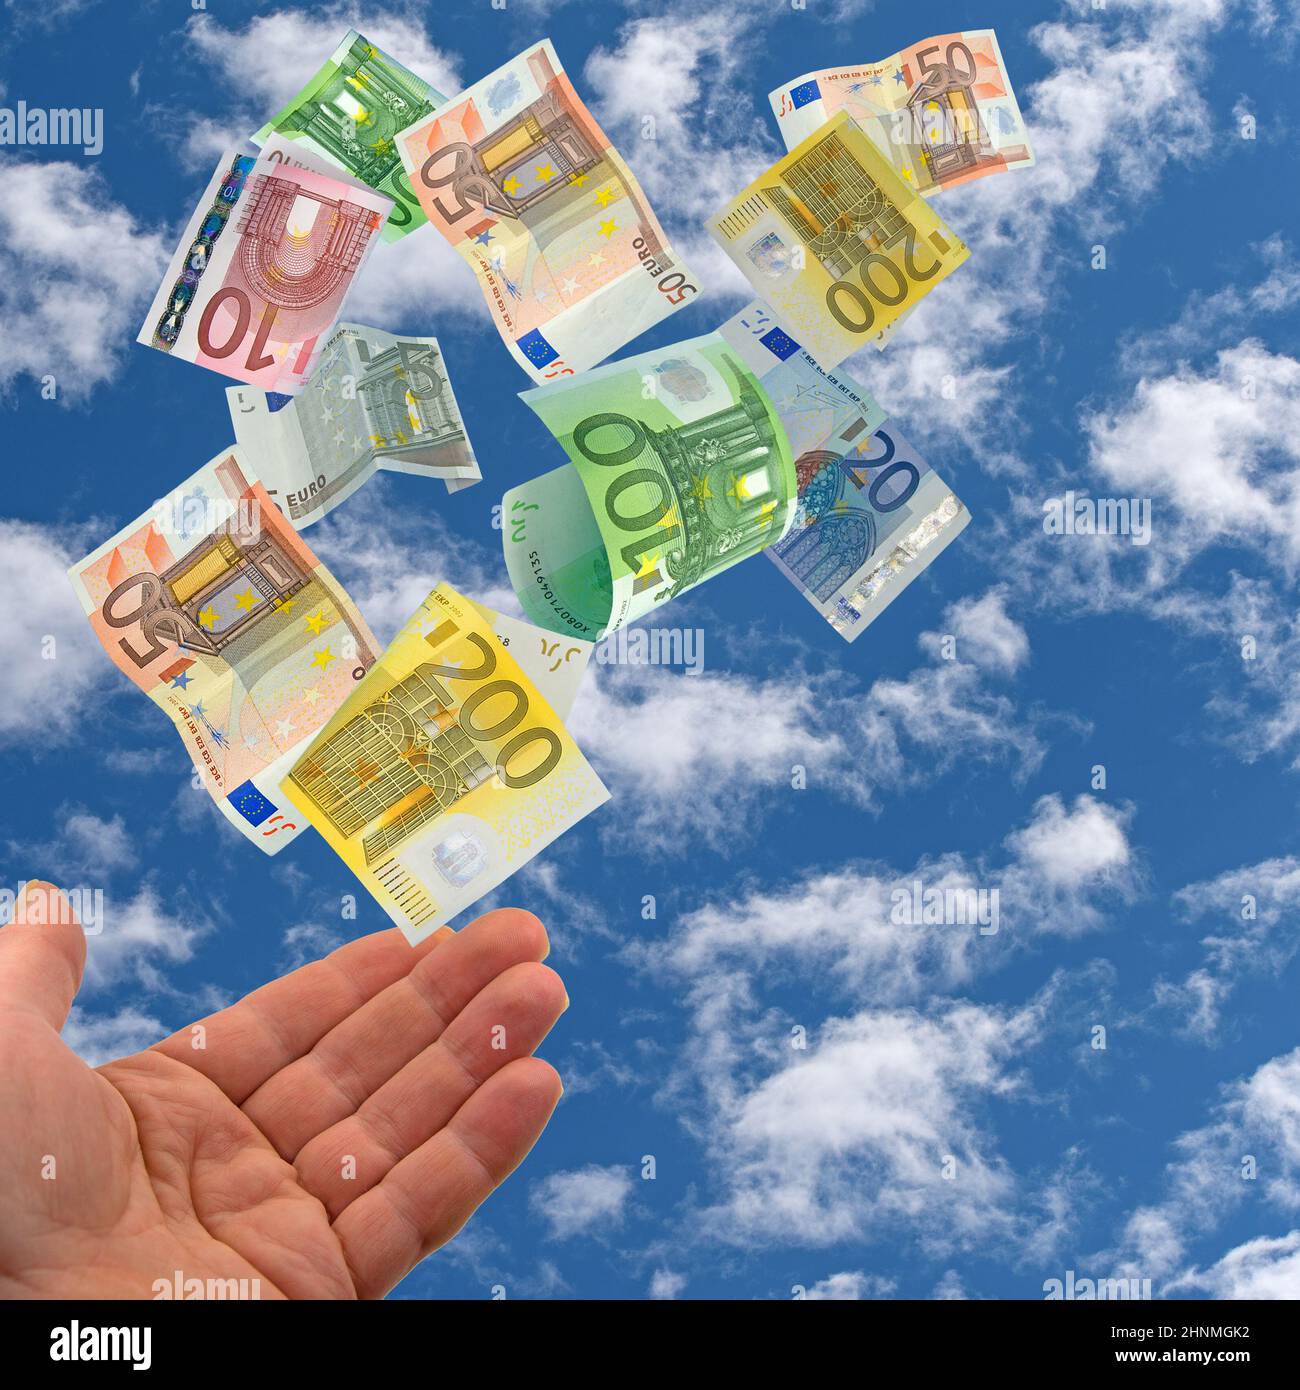 Opened hand and banknotes against sky with clouds Stock Photo